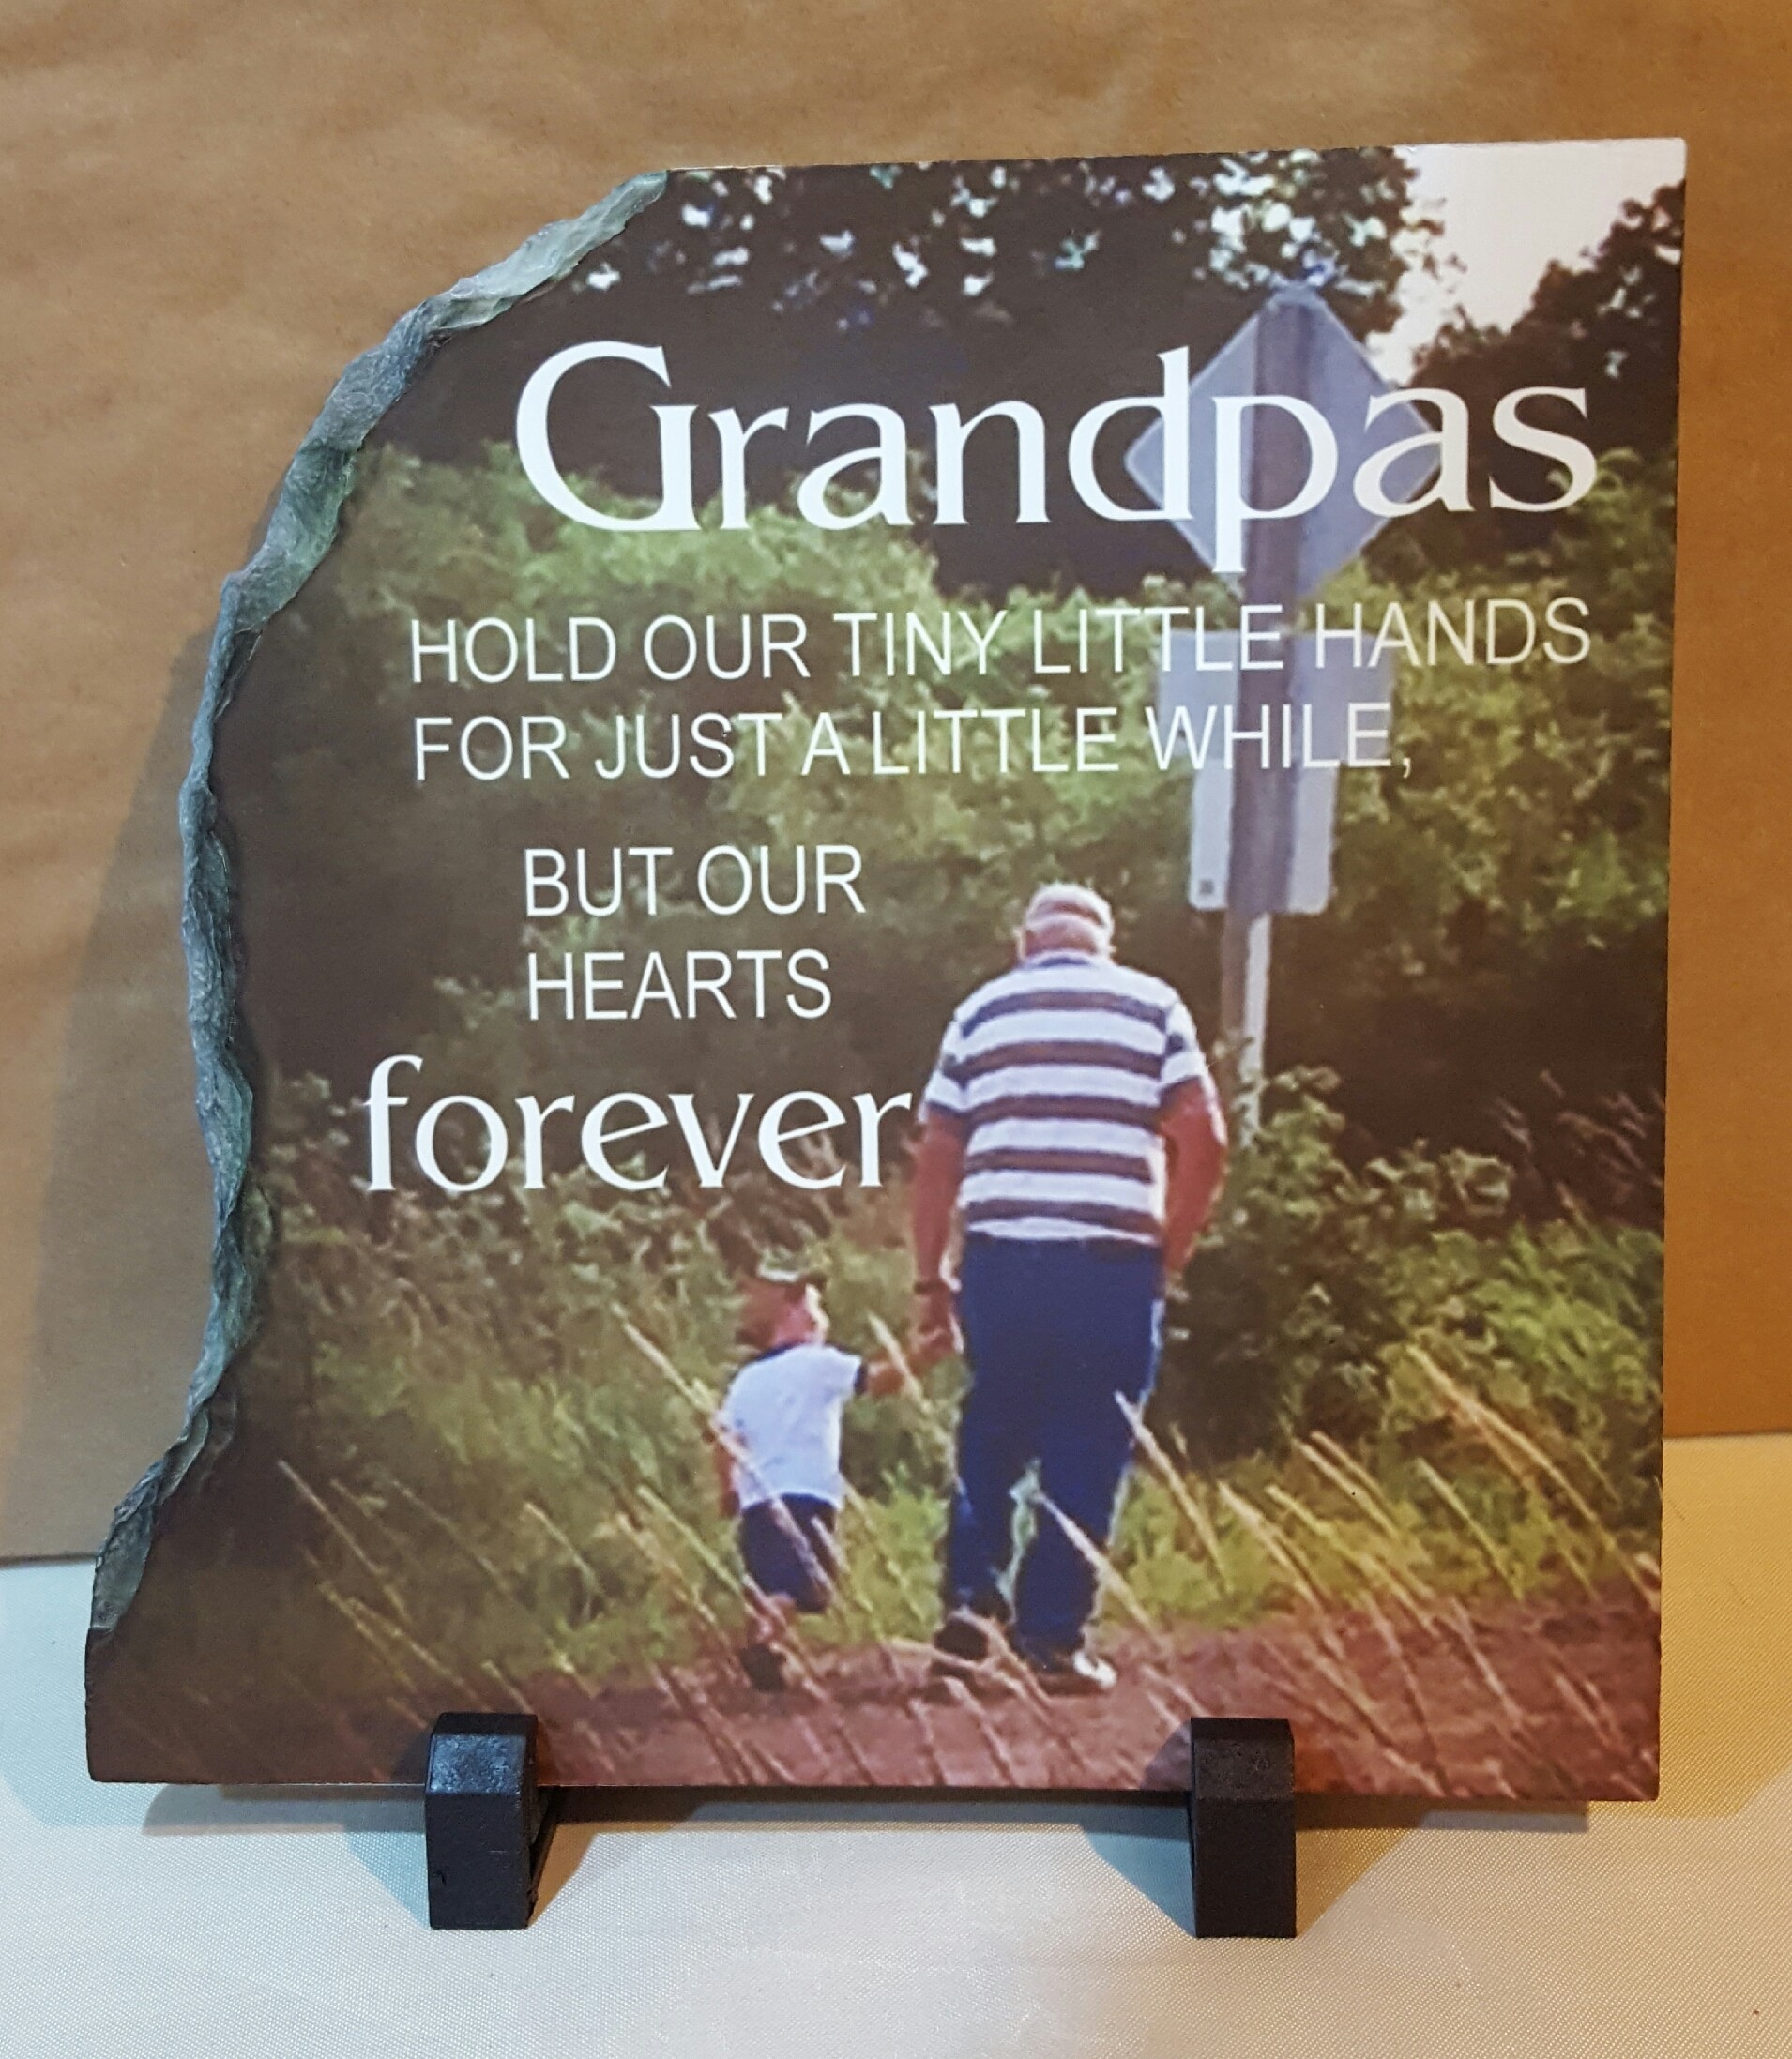 Grandpa Norman made with sublimation printing